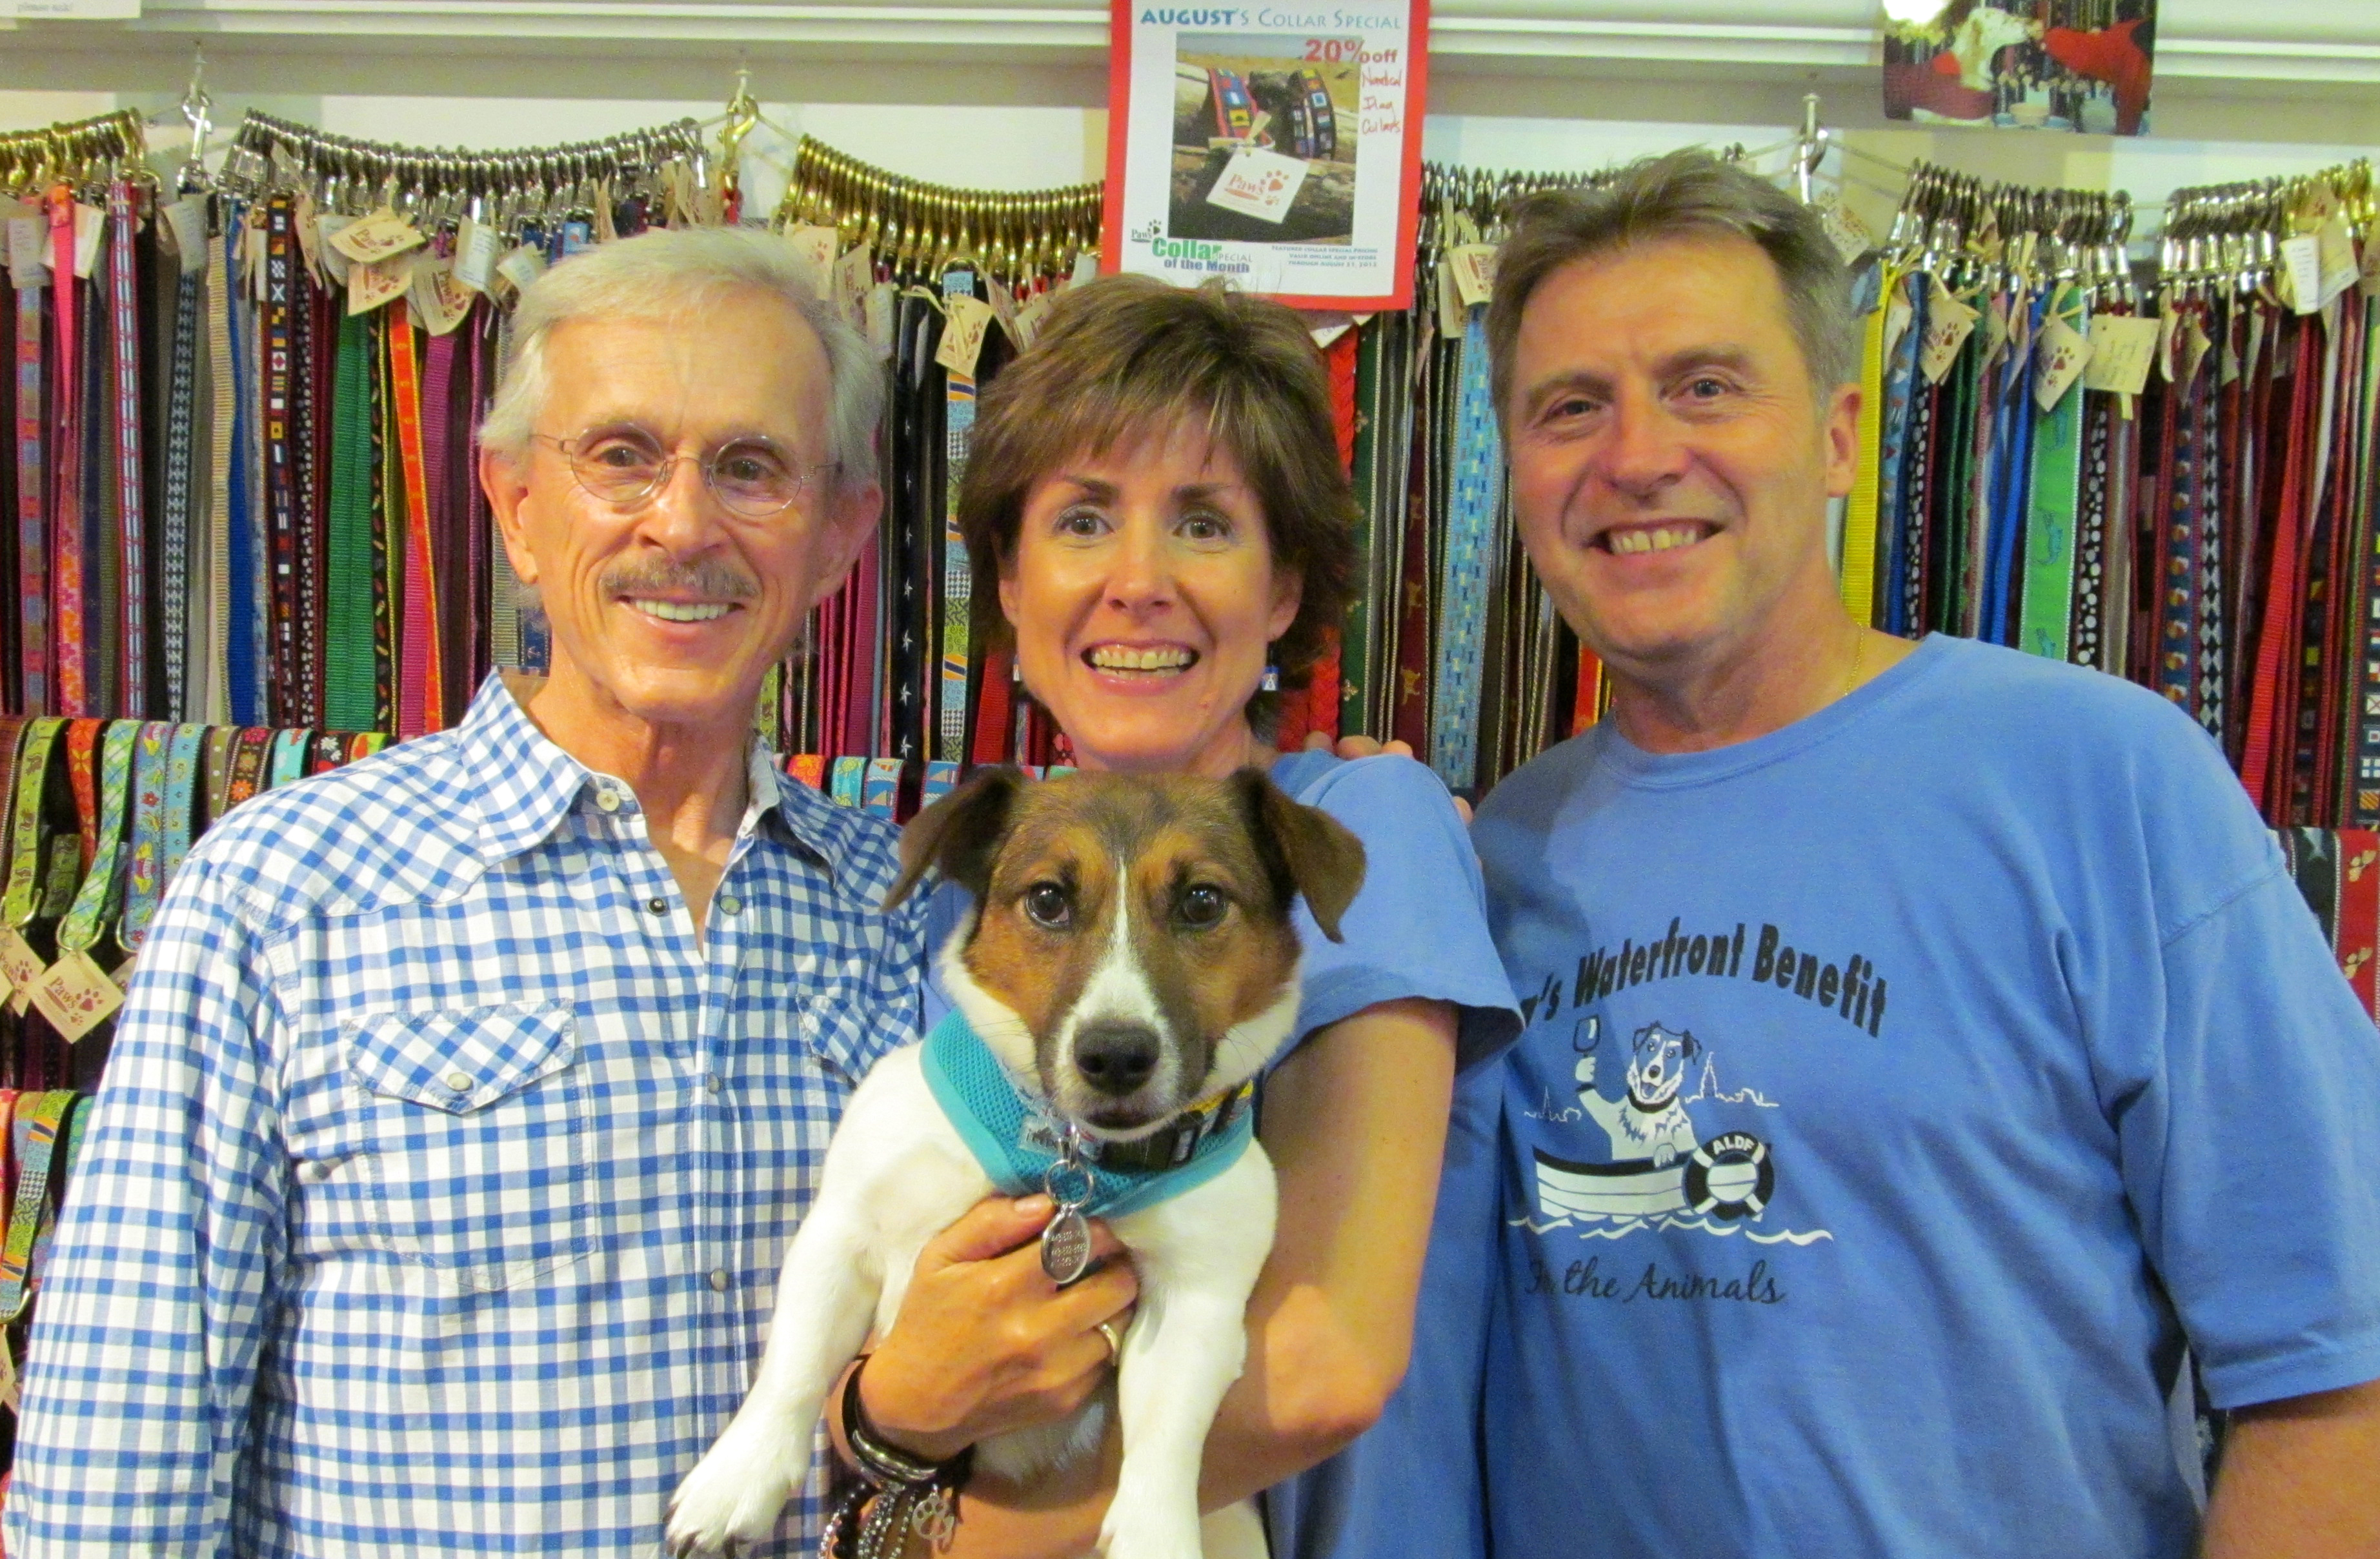 Dick of The Smothers comes to Paws pet boutique